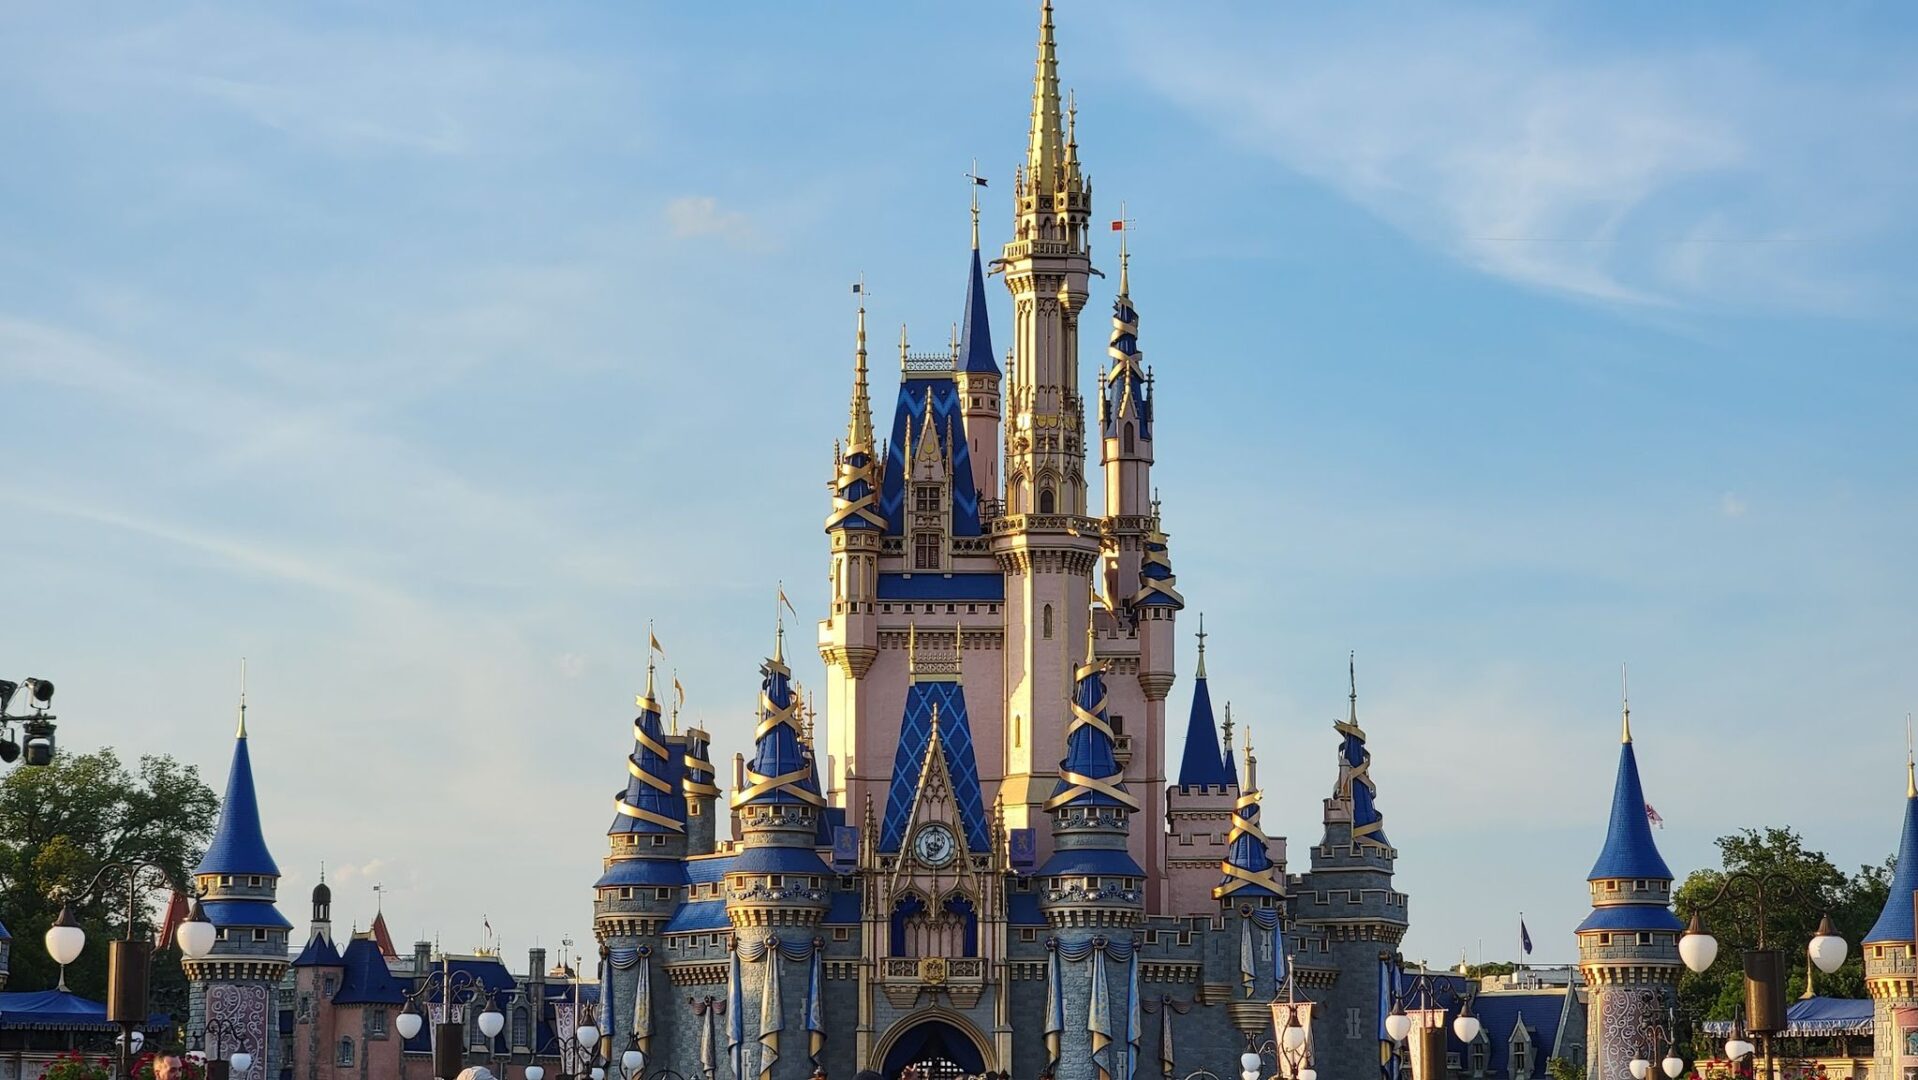 Look at Cinderella Castle Without the 50th Anniversary Decorations